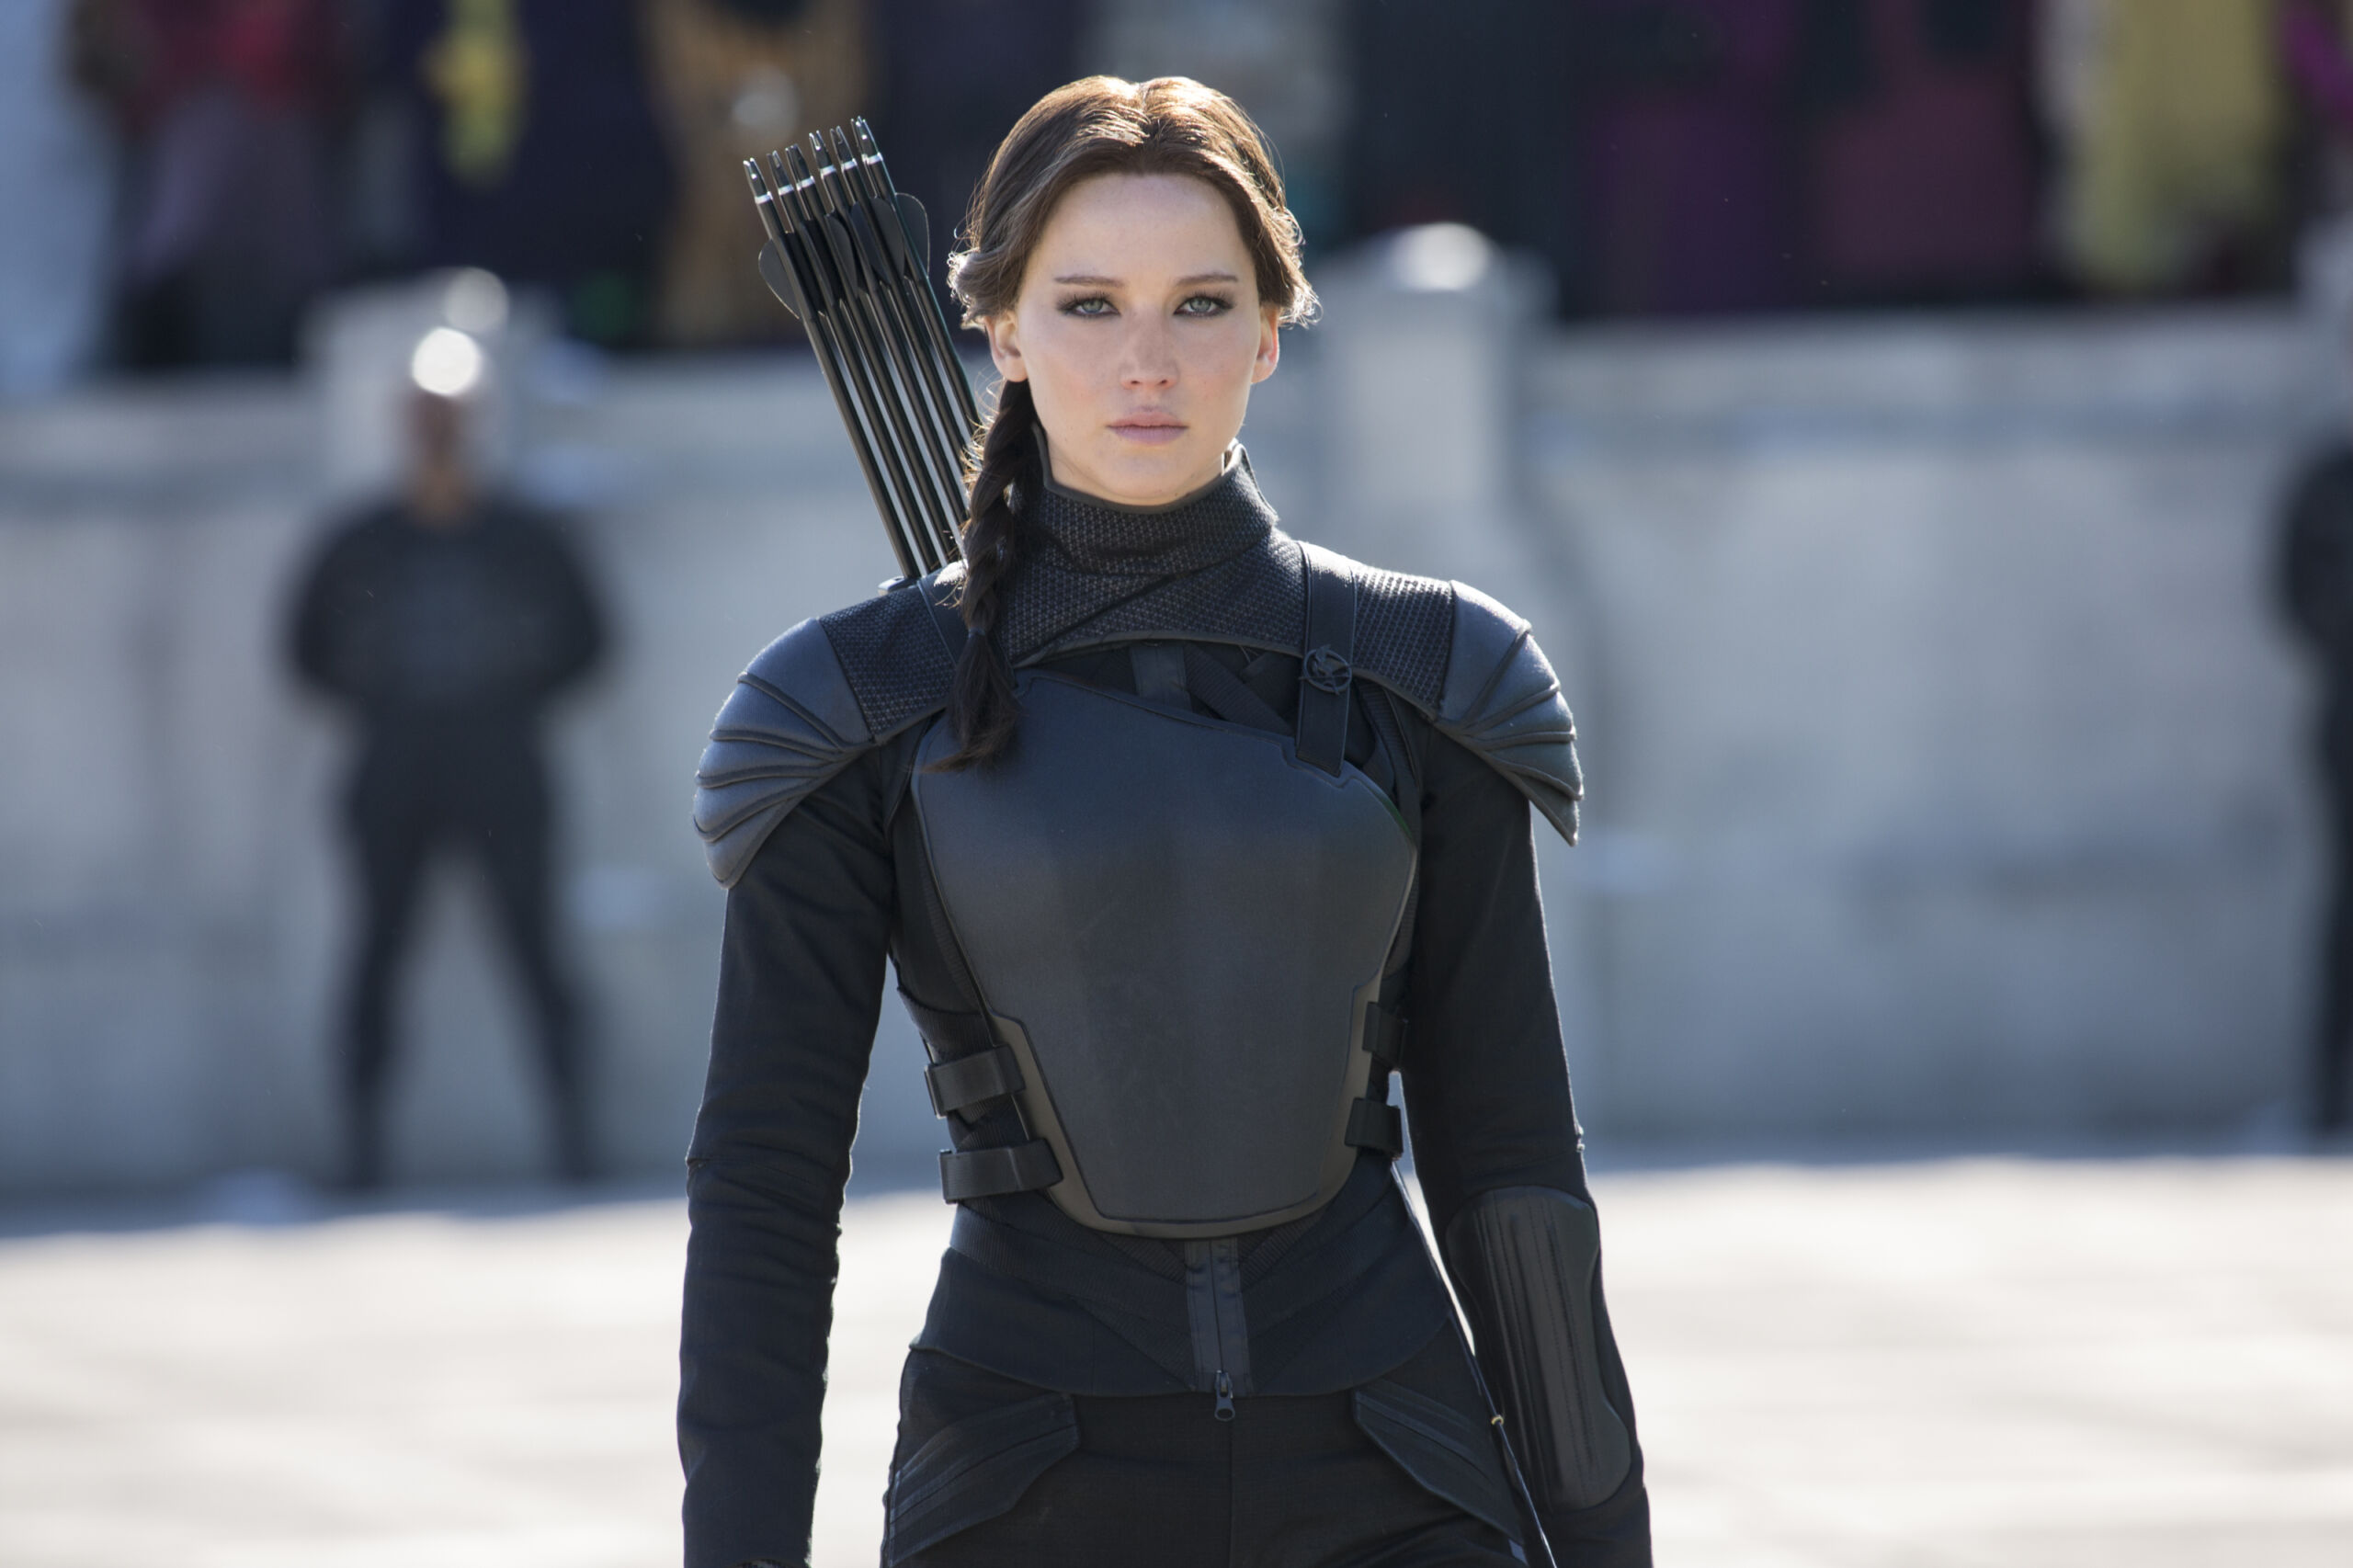 The Hunger Games movie order: Watch chronologically